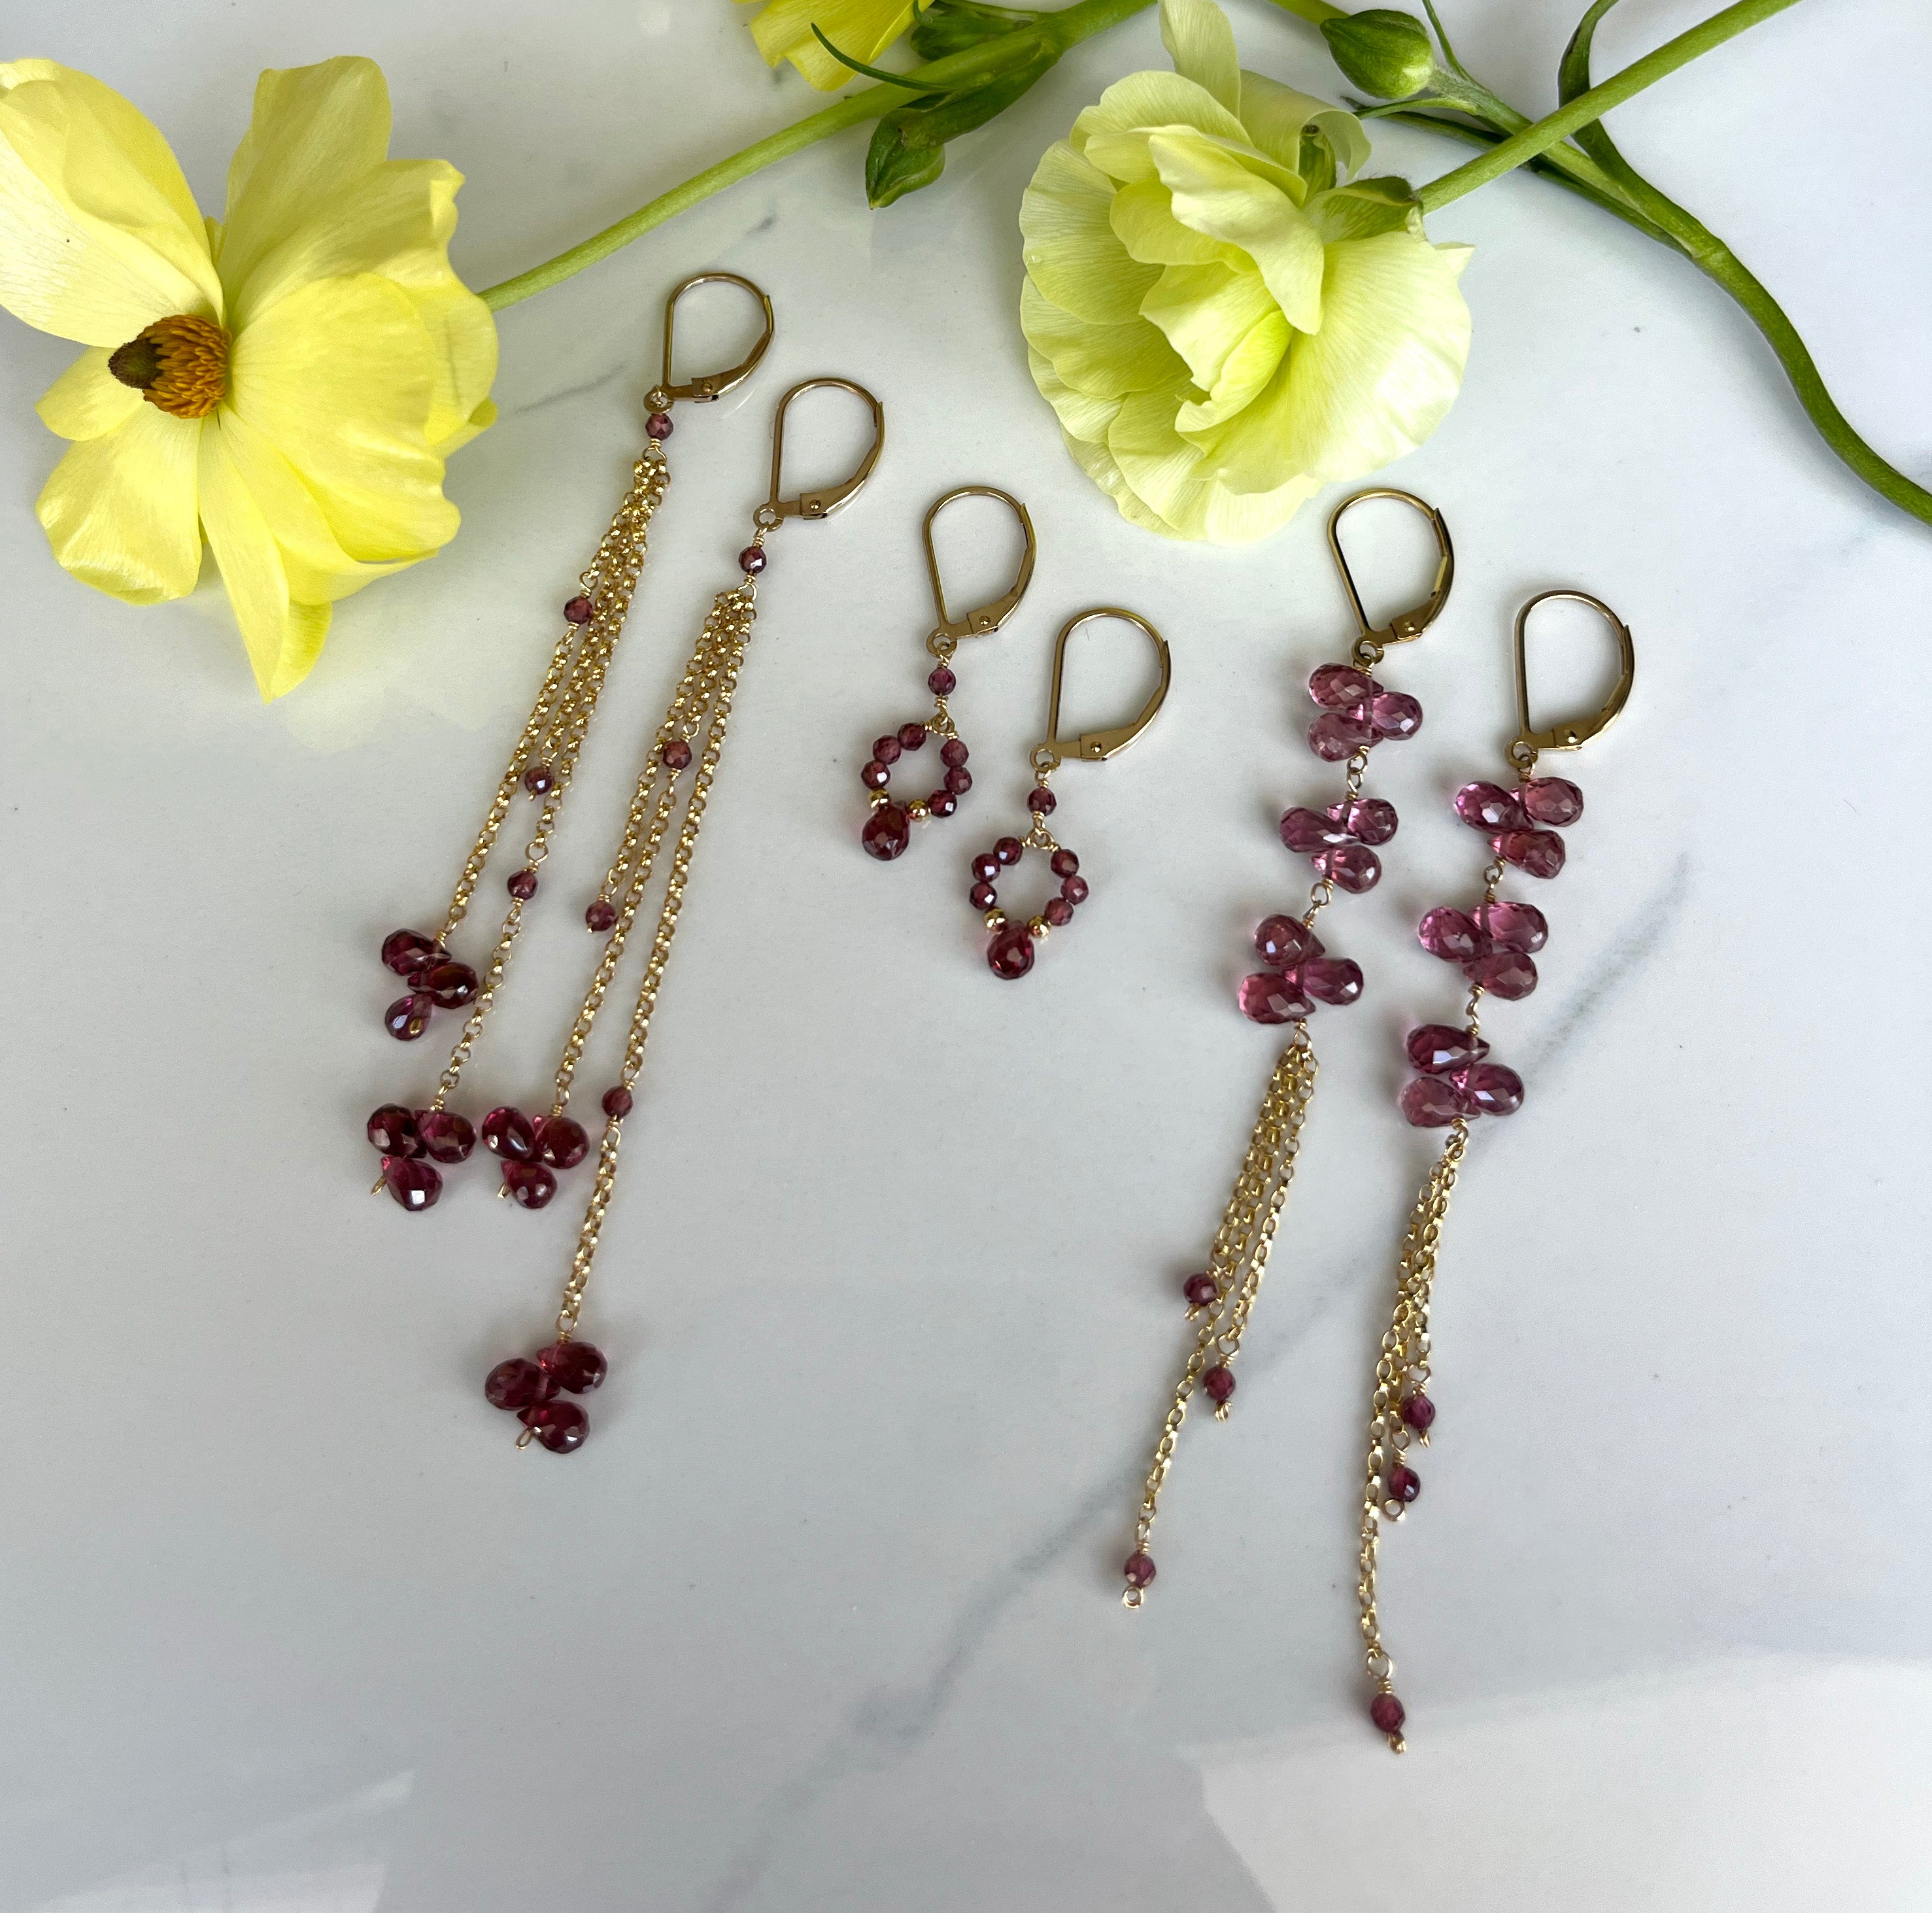 petal chain drops earrings - garnet briolettes with gold filled lever backs